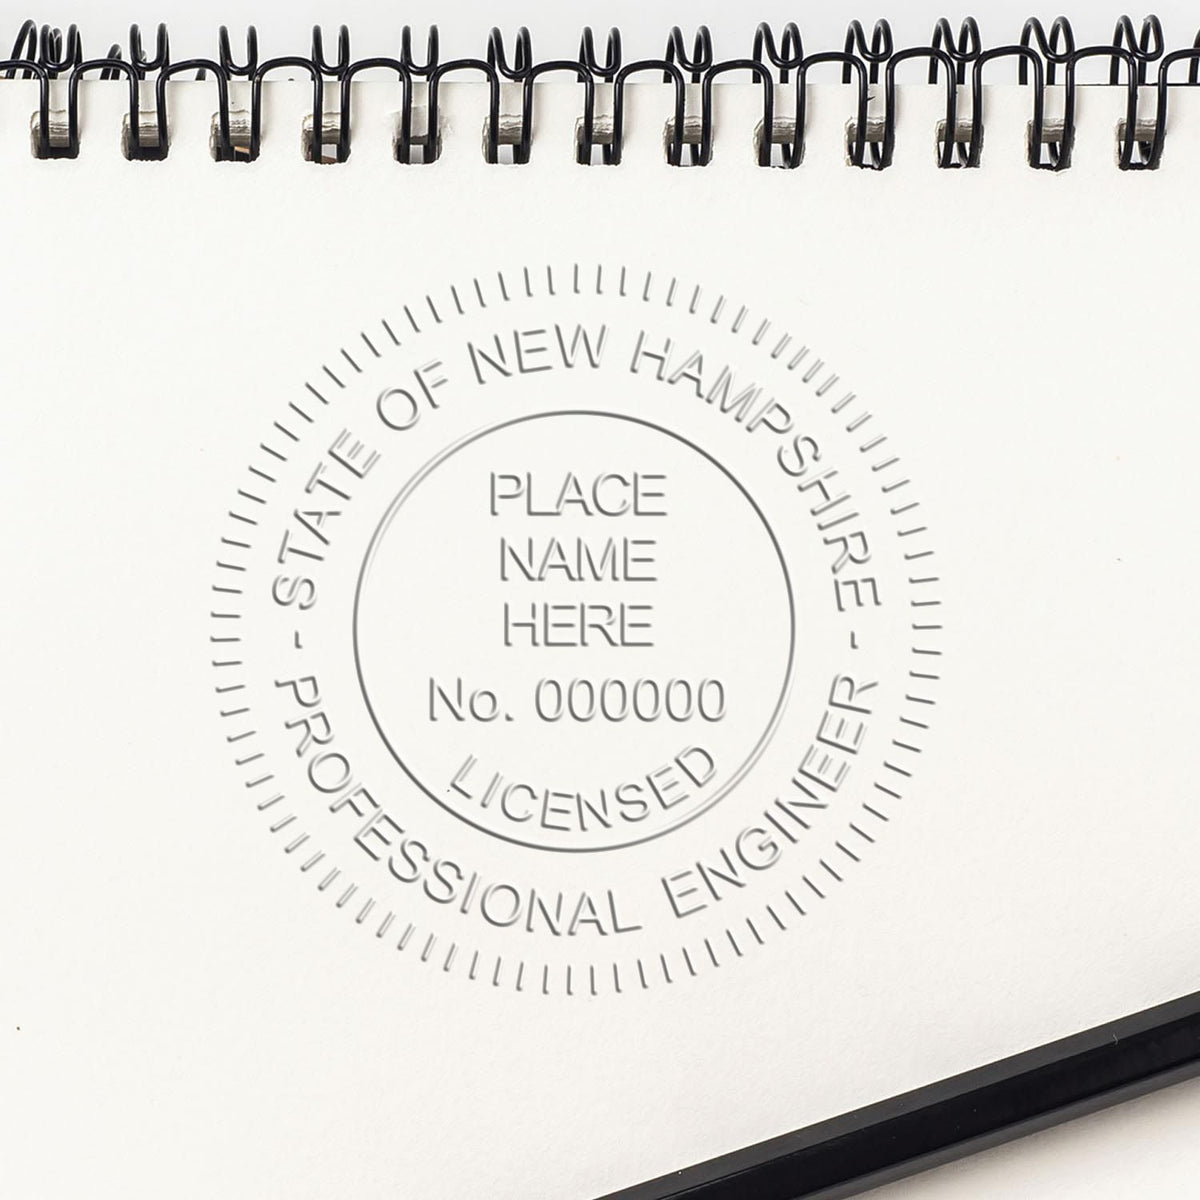 An alternative view of the State of New Hampshire Extended Long Reach Engineer Seal stamped on a sheet of paper showing the image in use